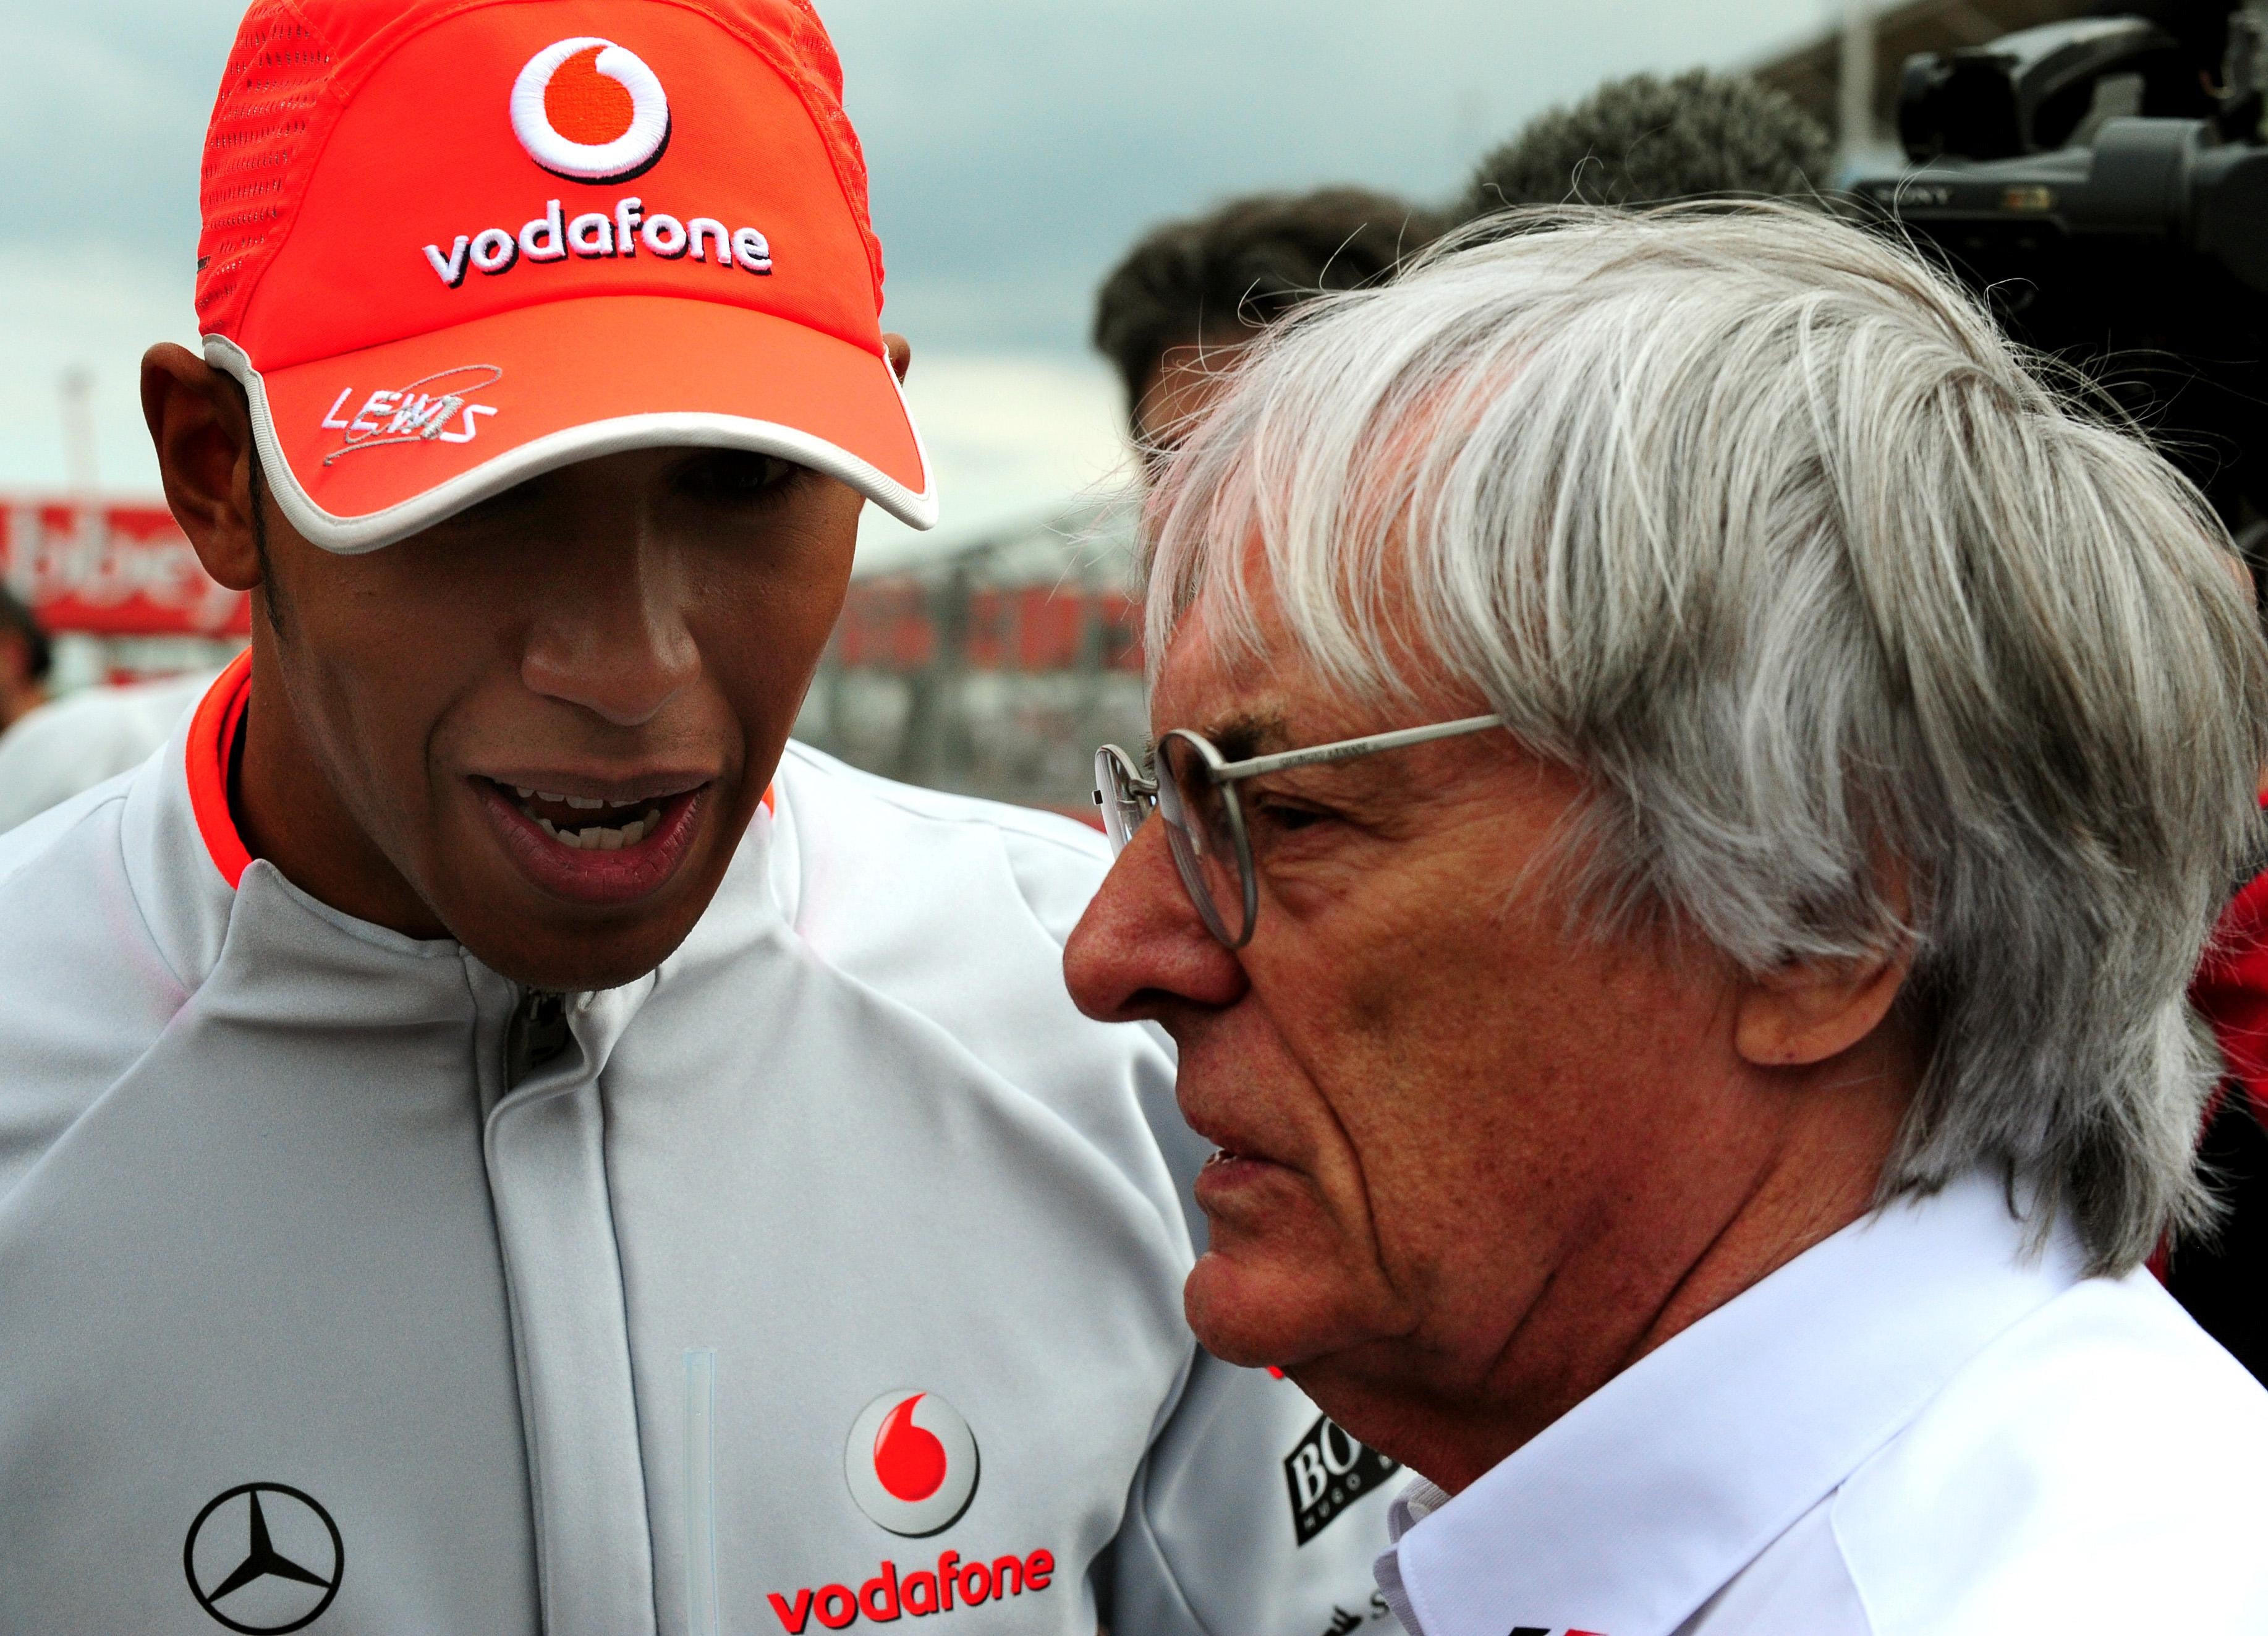 Hamilton and Ecclestone clashed last year following controversial comments the former F1 supremo made in a CNN interview